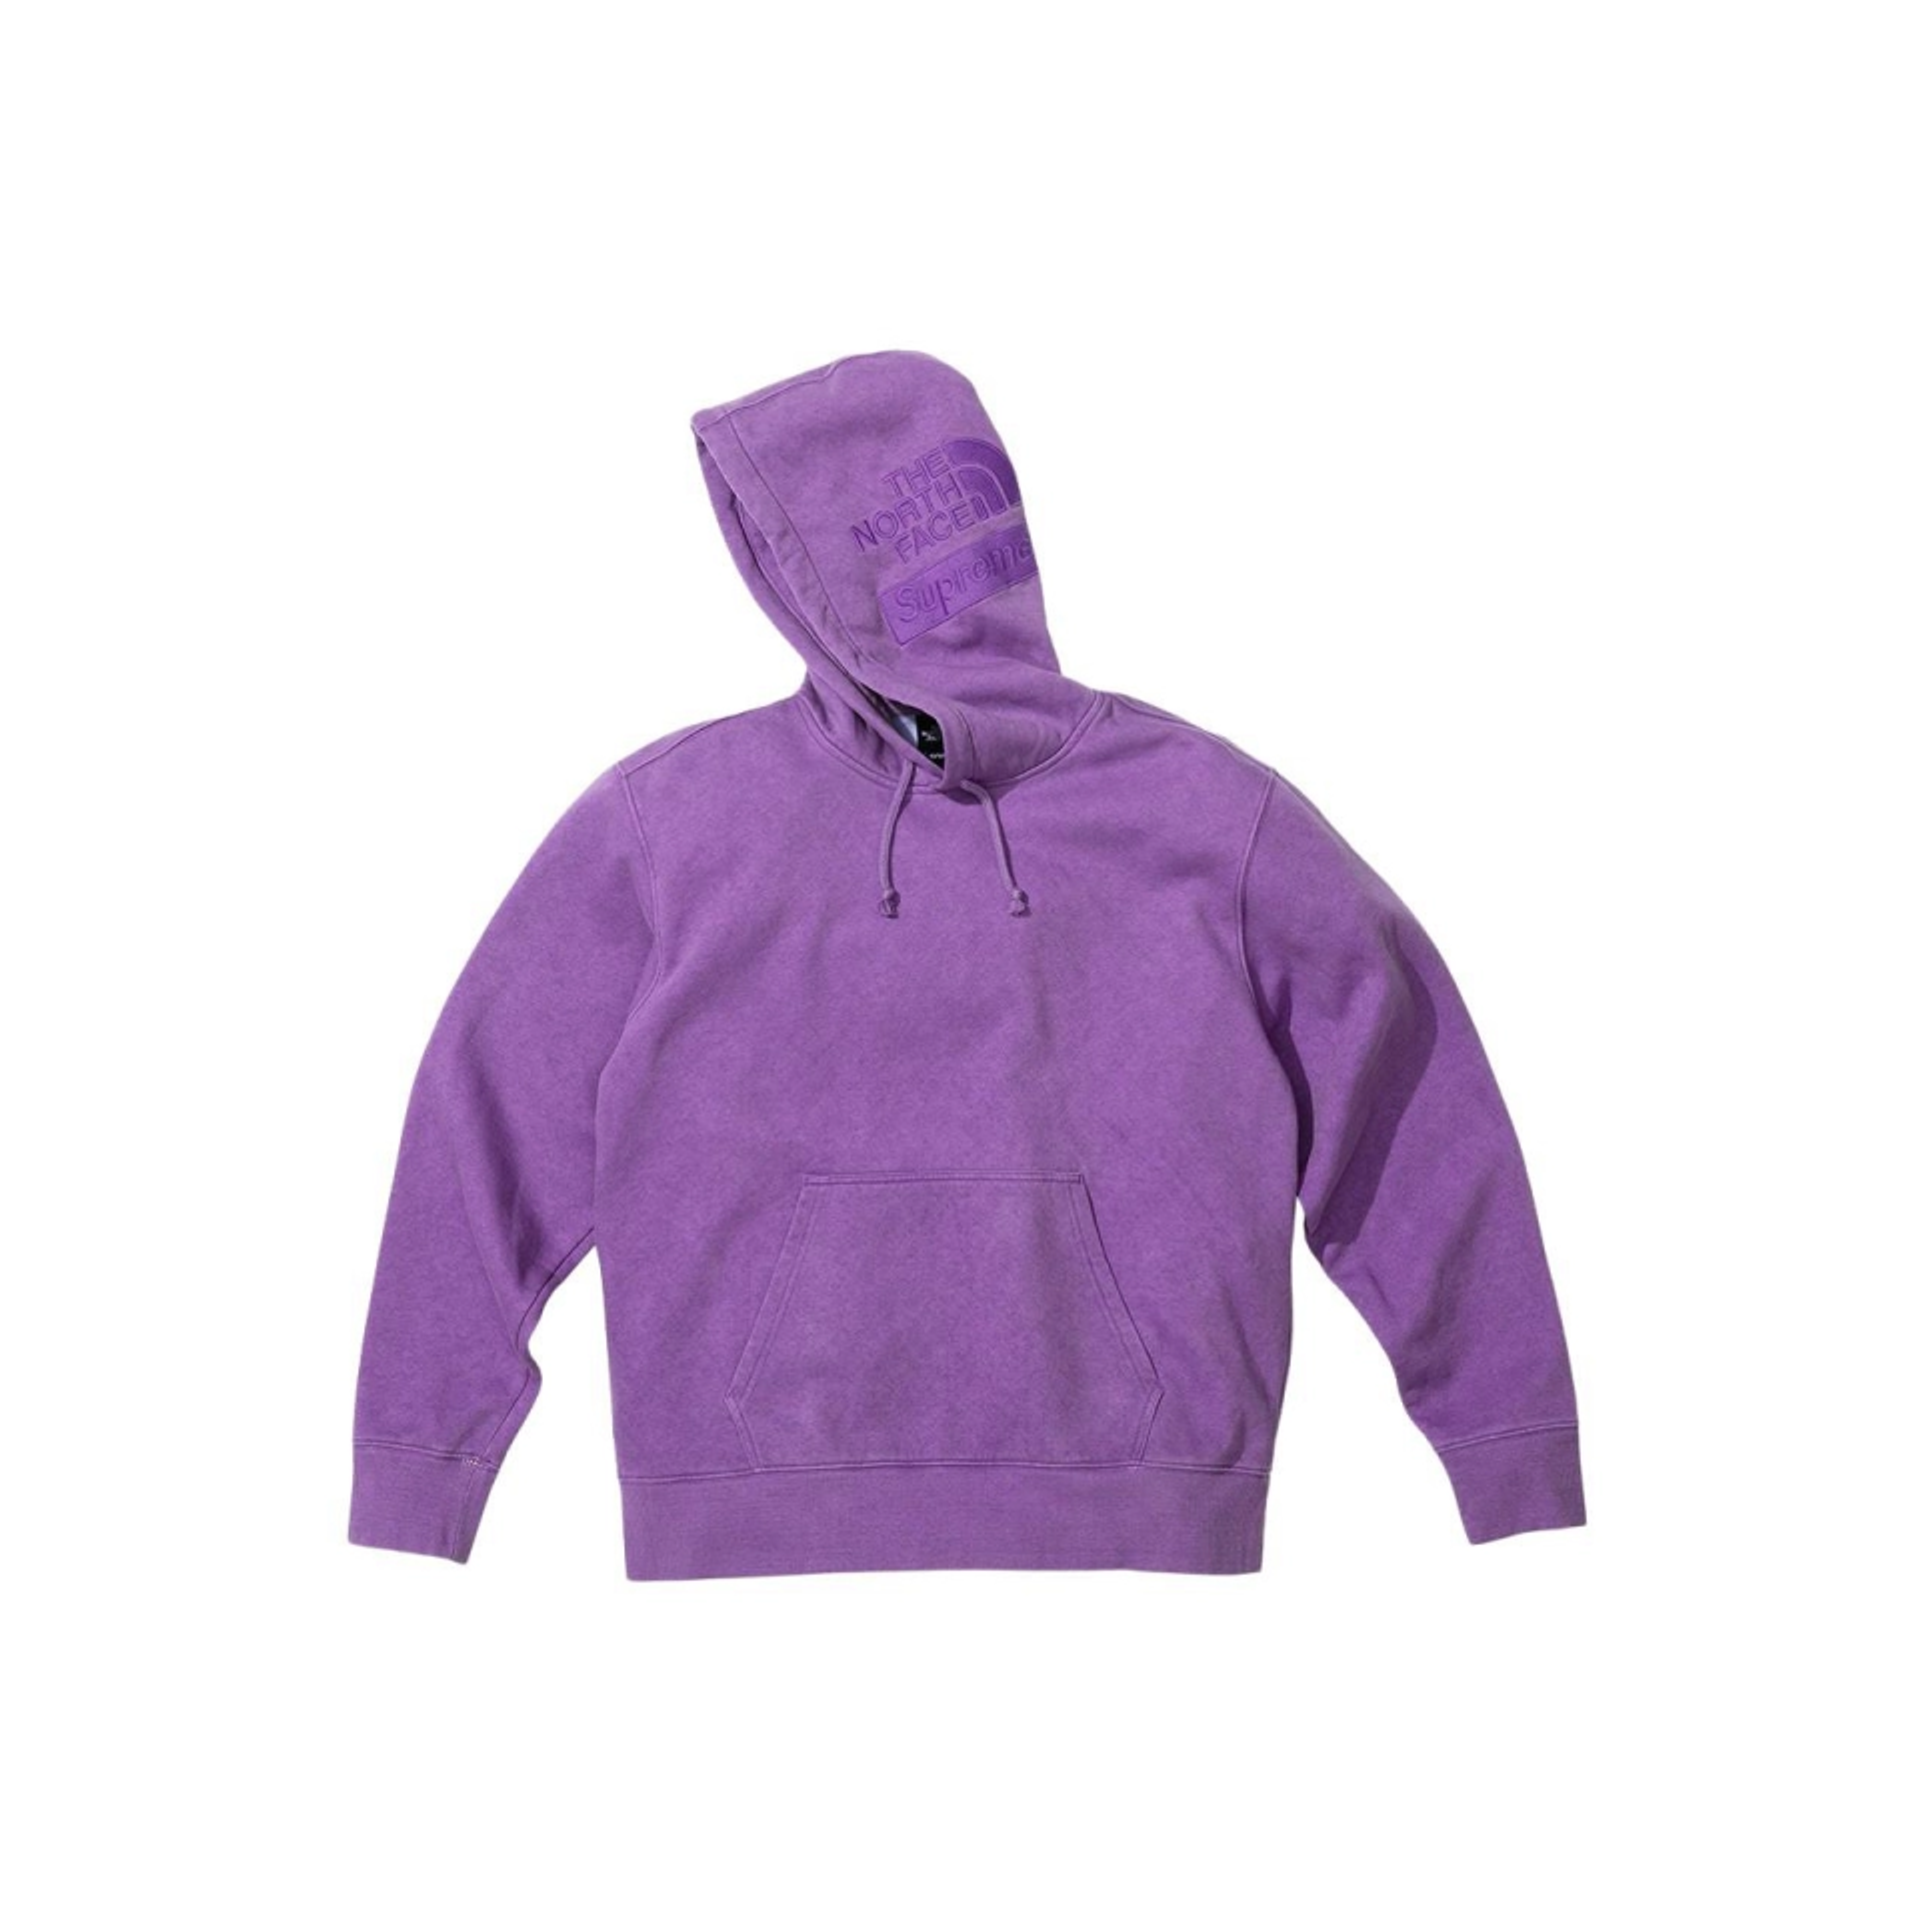 Supreme x The North Face Pigment Printed Hooded Sweatshirt 'Purple'